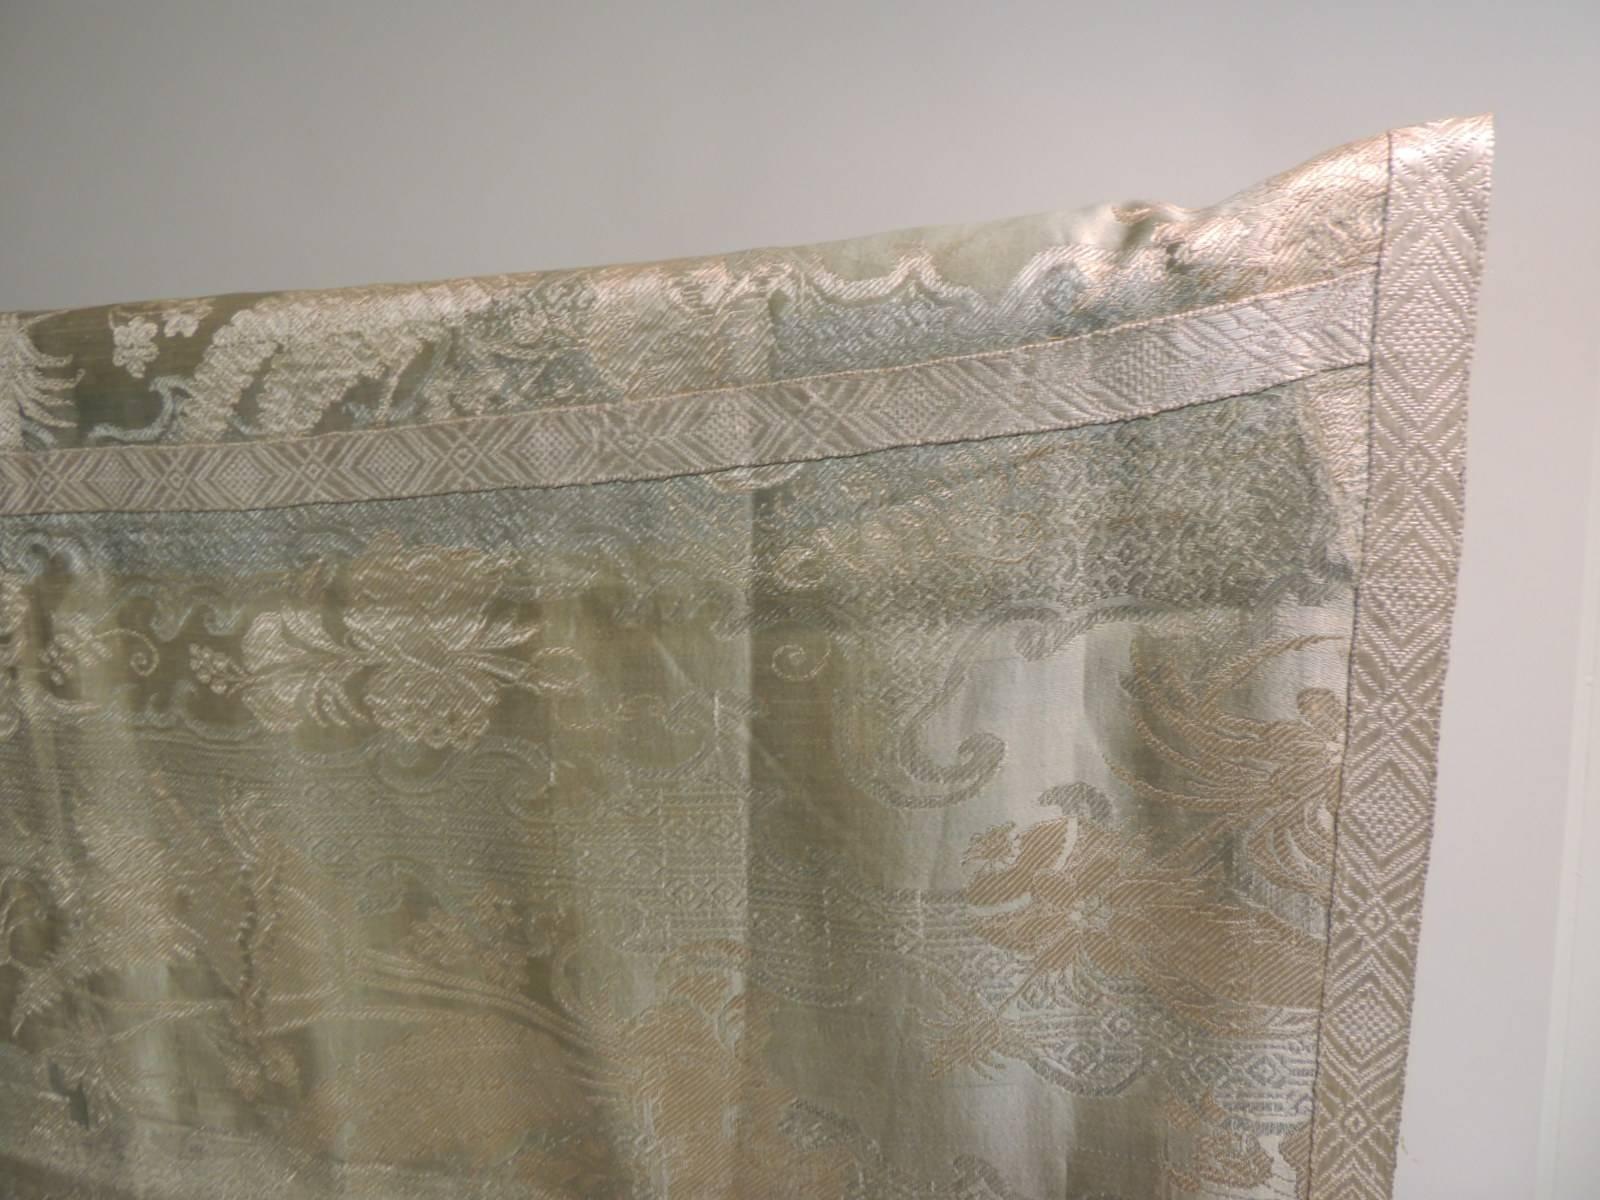 Celadon green and grey with some faded tone-on-tone flowers framed with silver metallic trim and across the center of the cloth. Lined with yellow solid silk backing.
(one small pink stained from aged)
Ideal for a dining table, center table, could